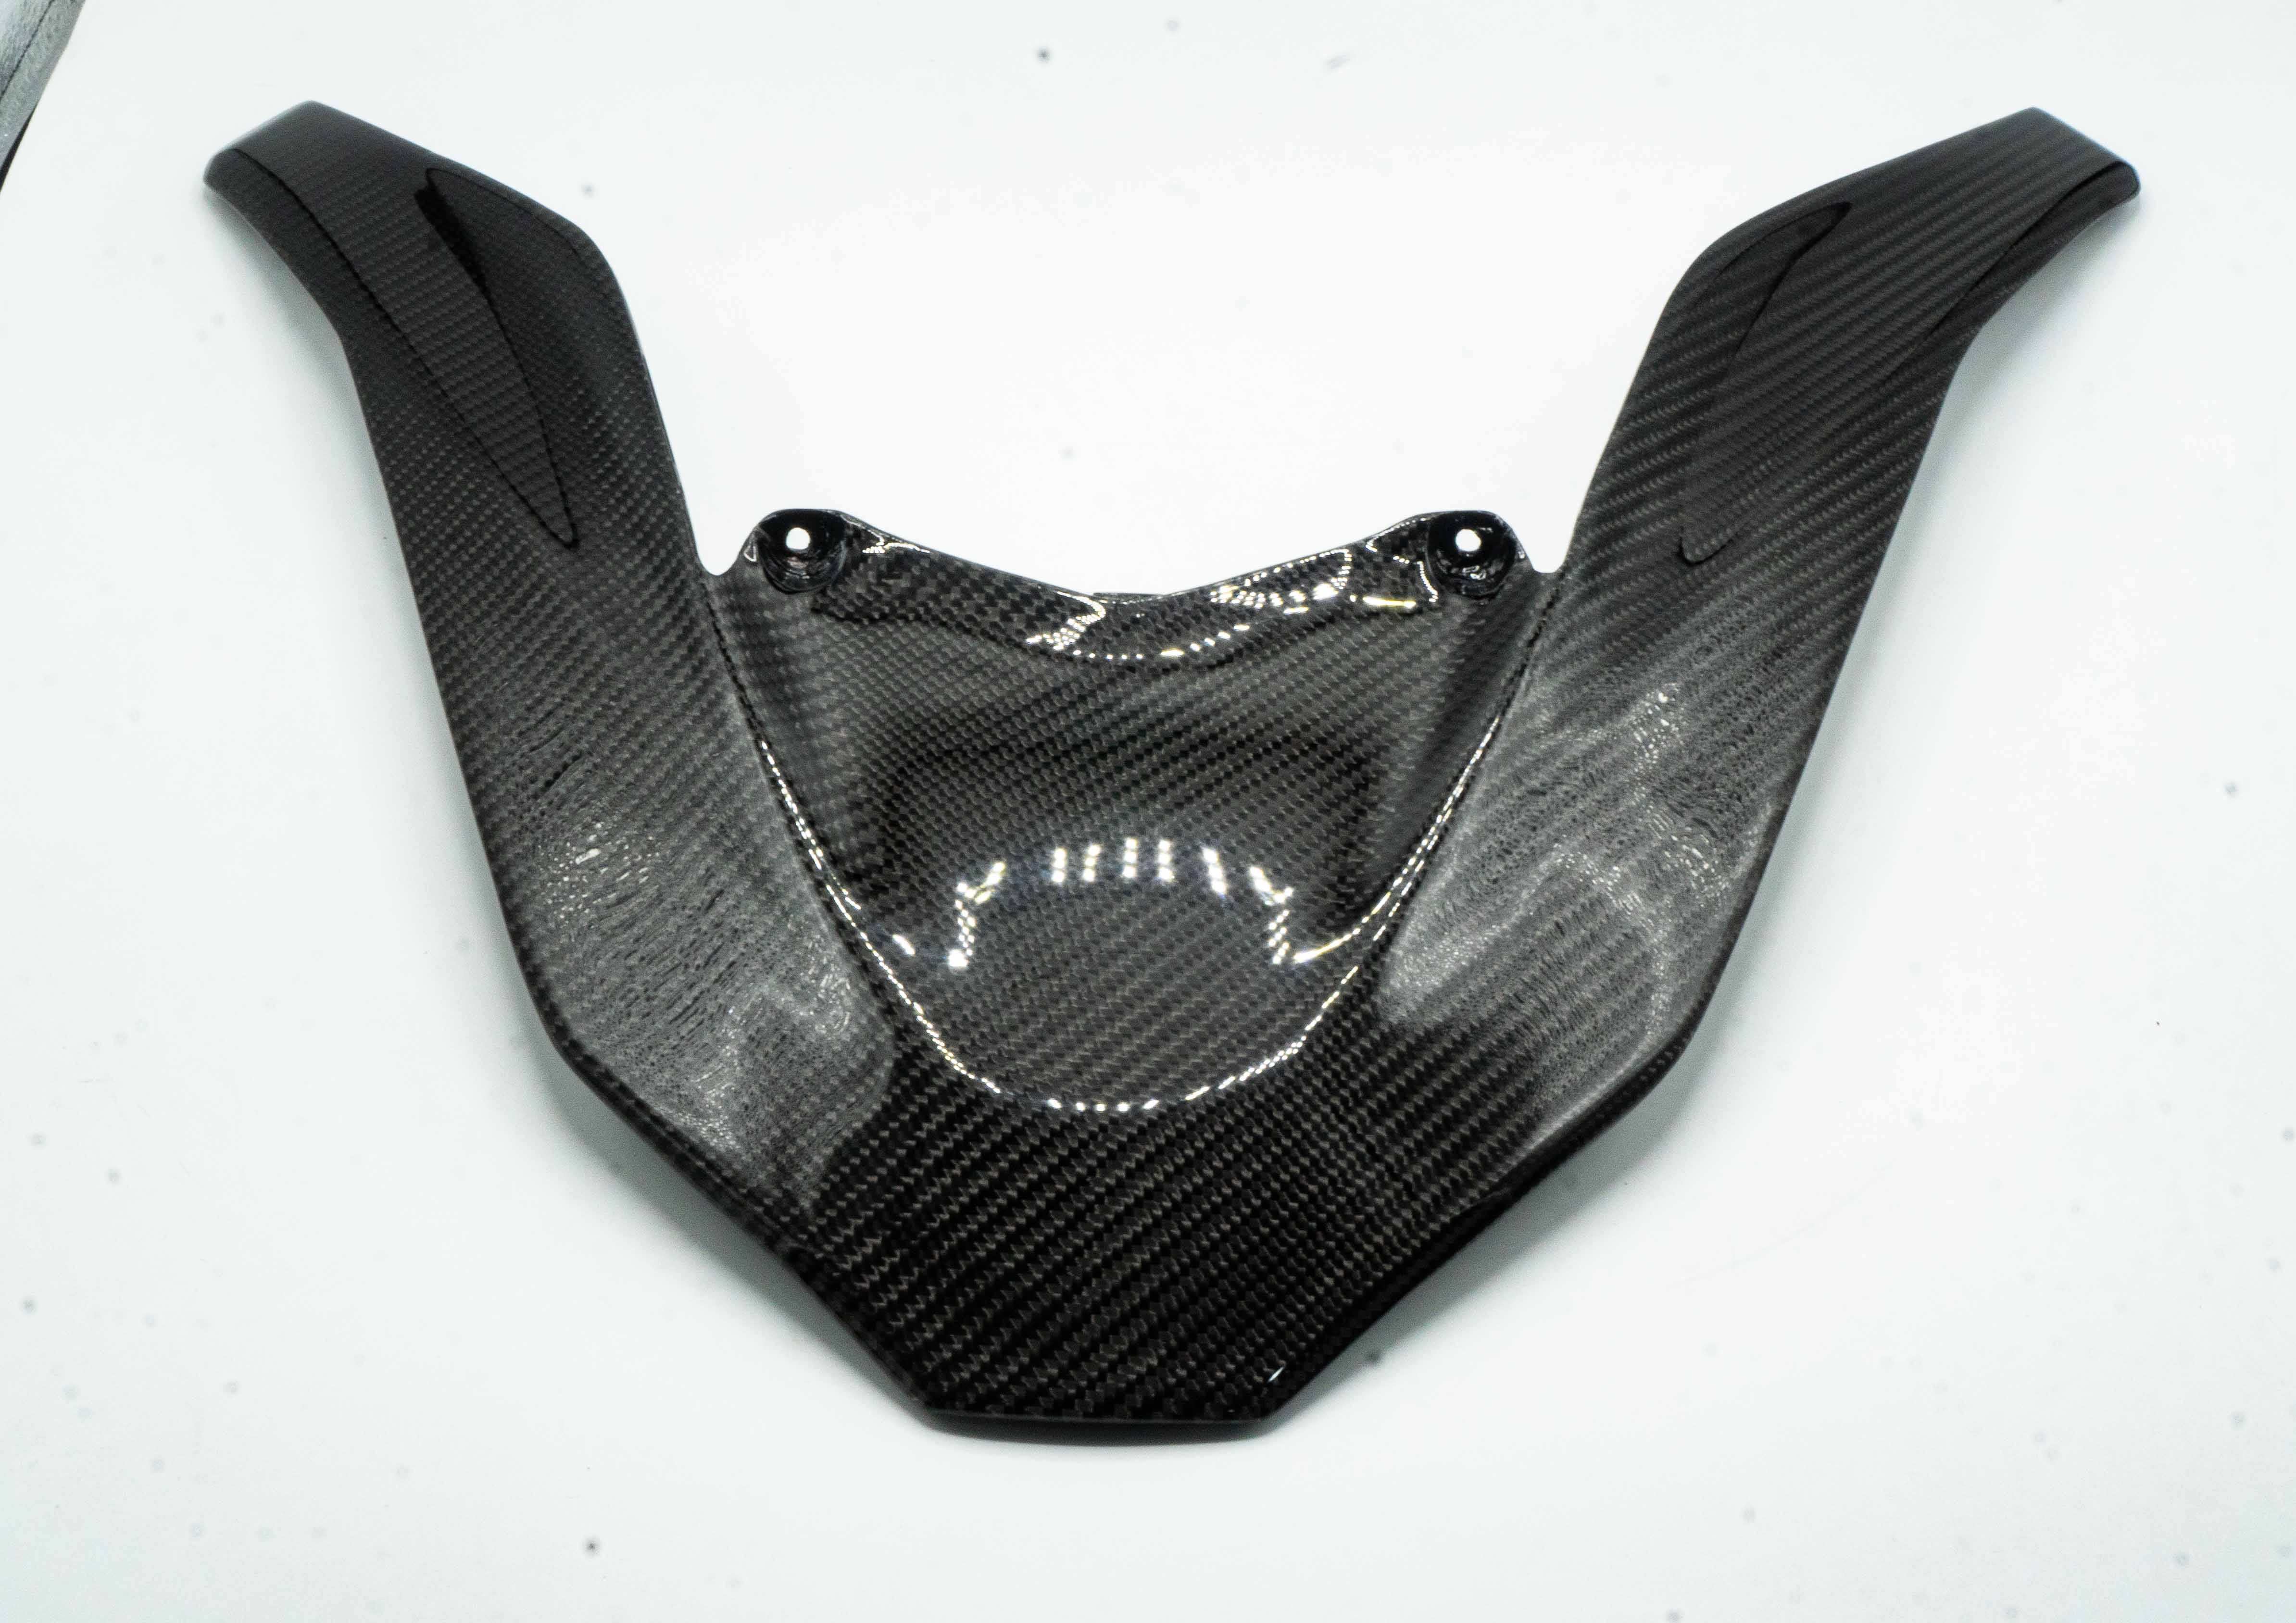 Under Windshield Carbon For New Honda PCX160 